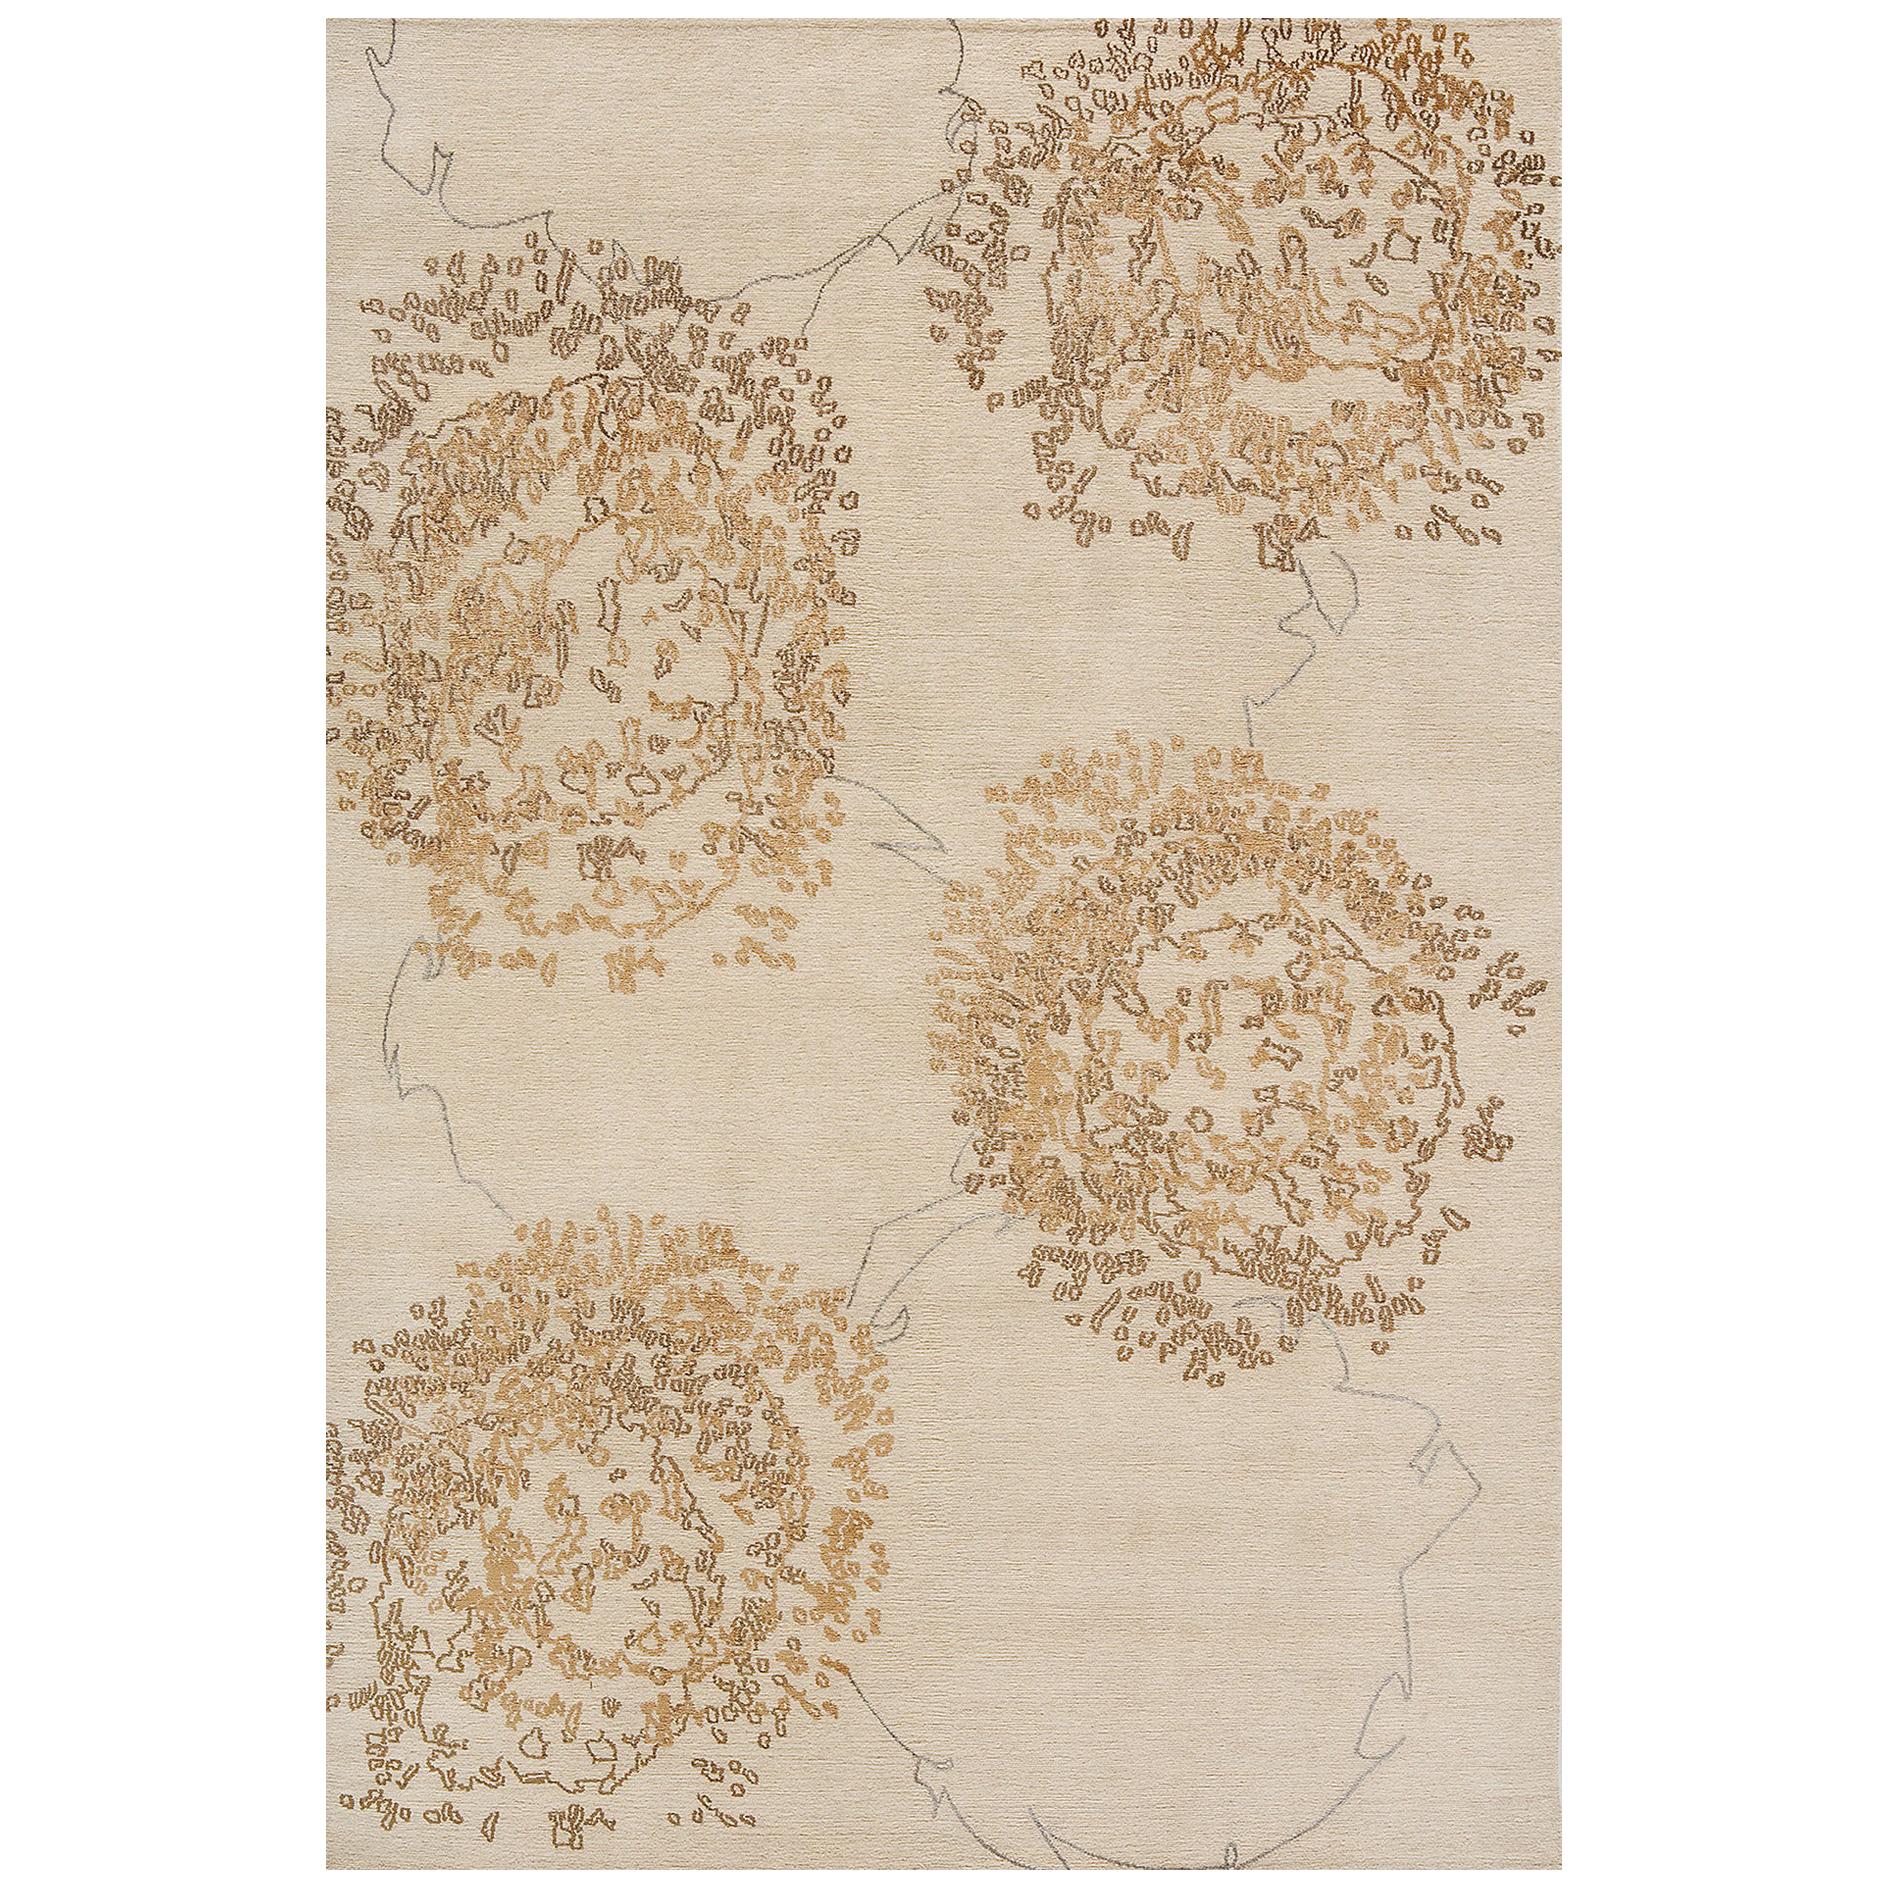 Abstract Contemporary Area Rug in Taupe, Handmade of Silk and Wool, "Zaza"